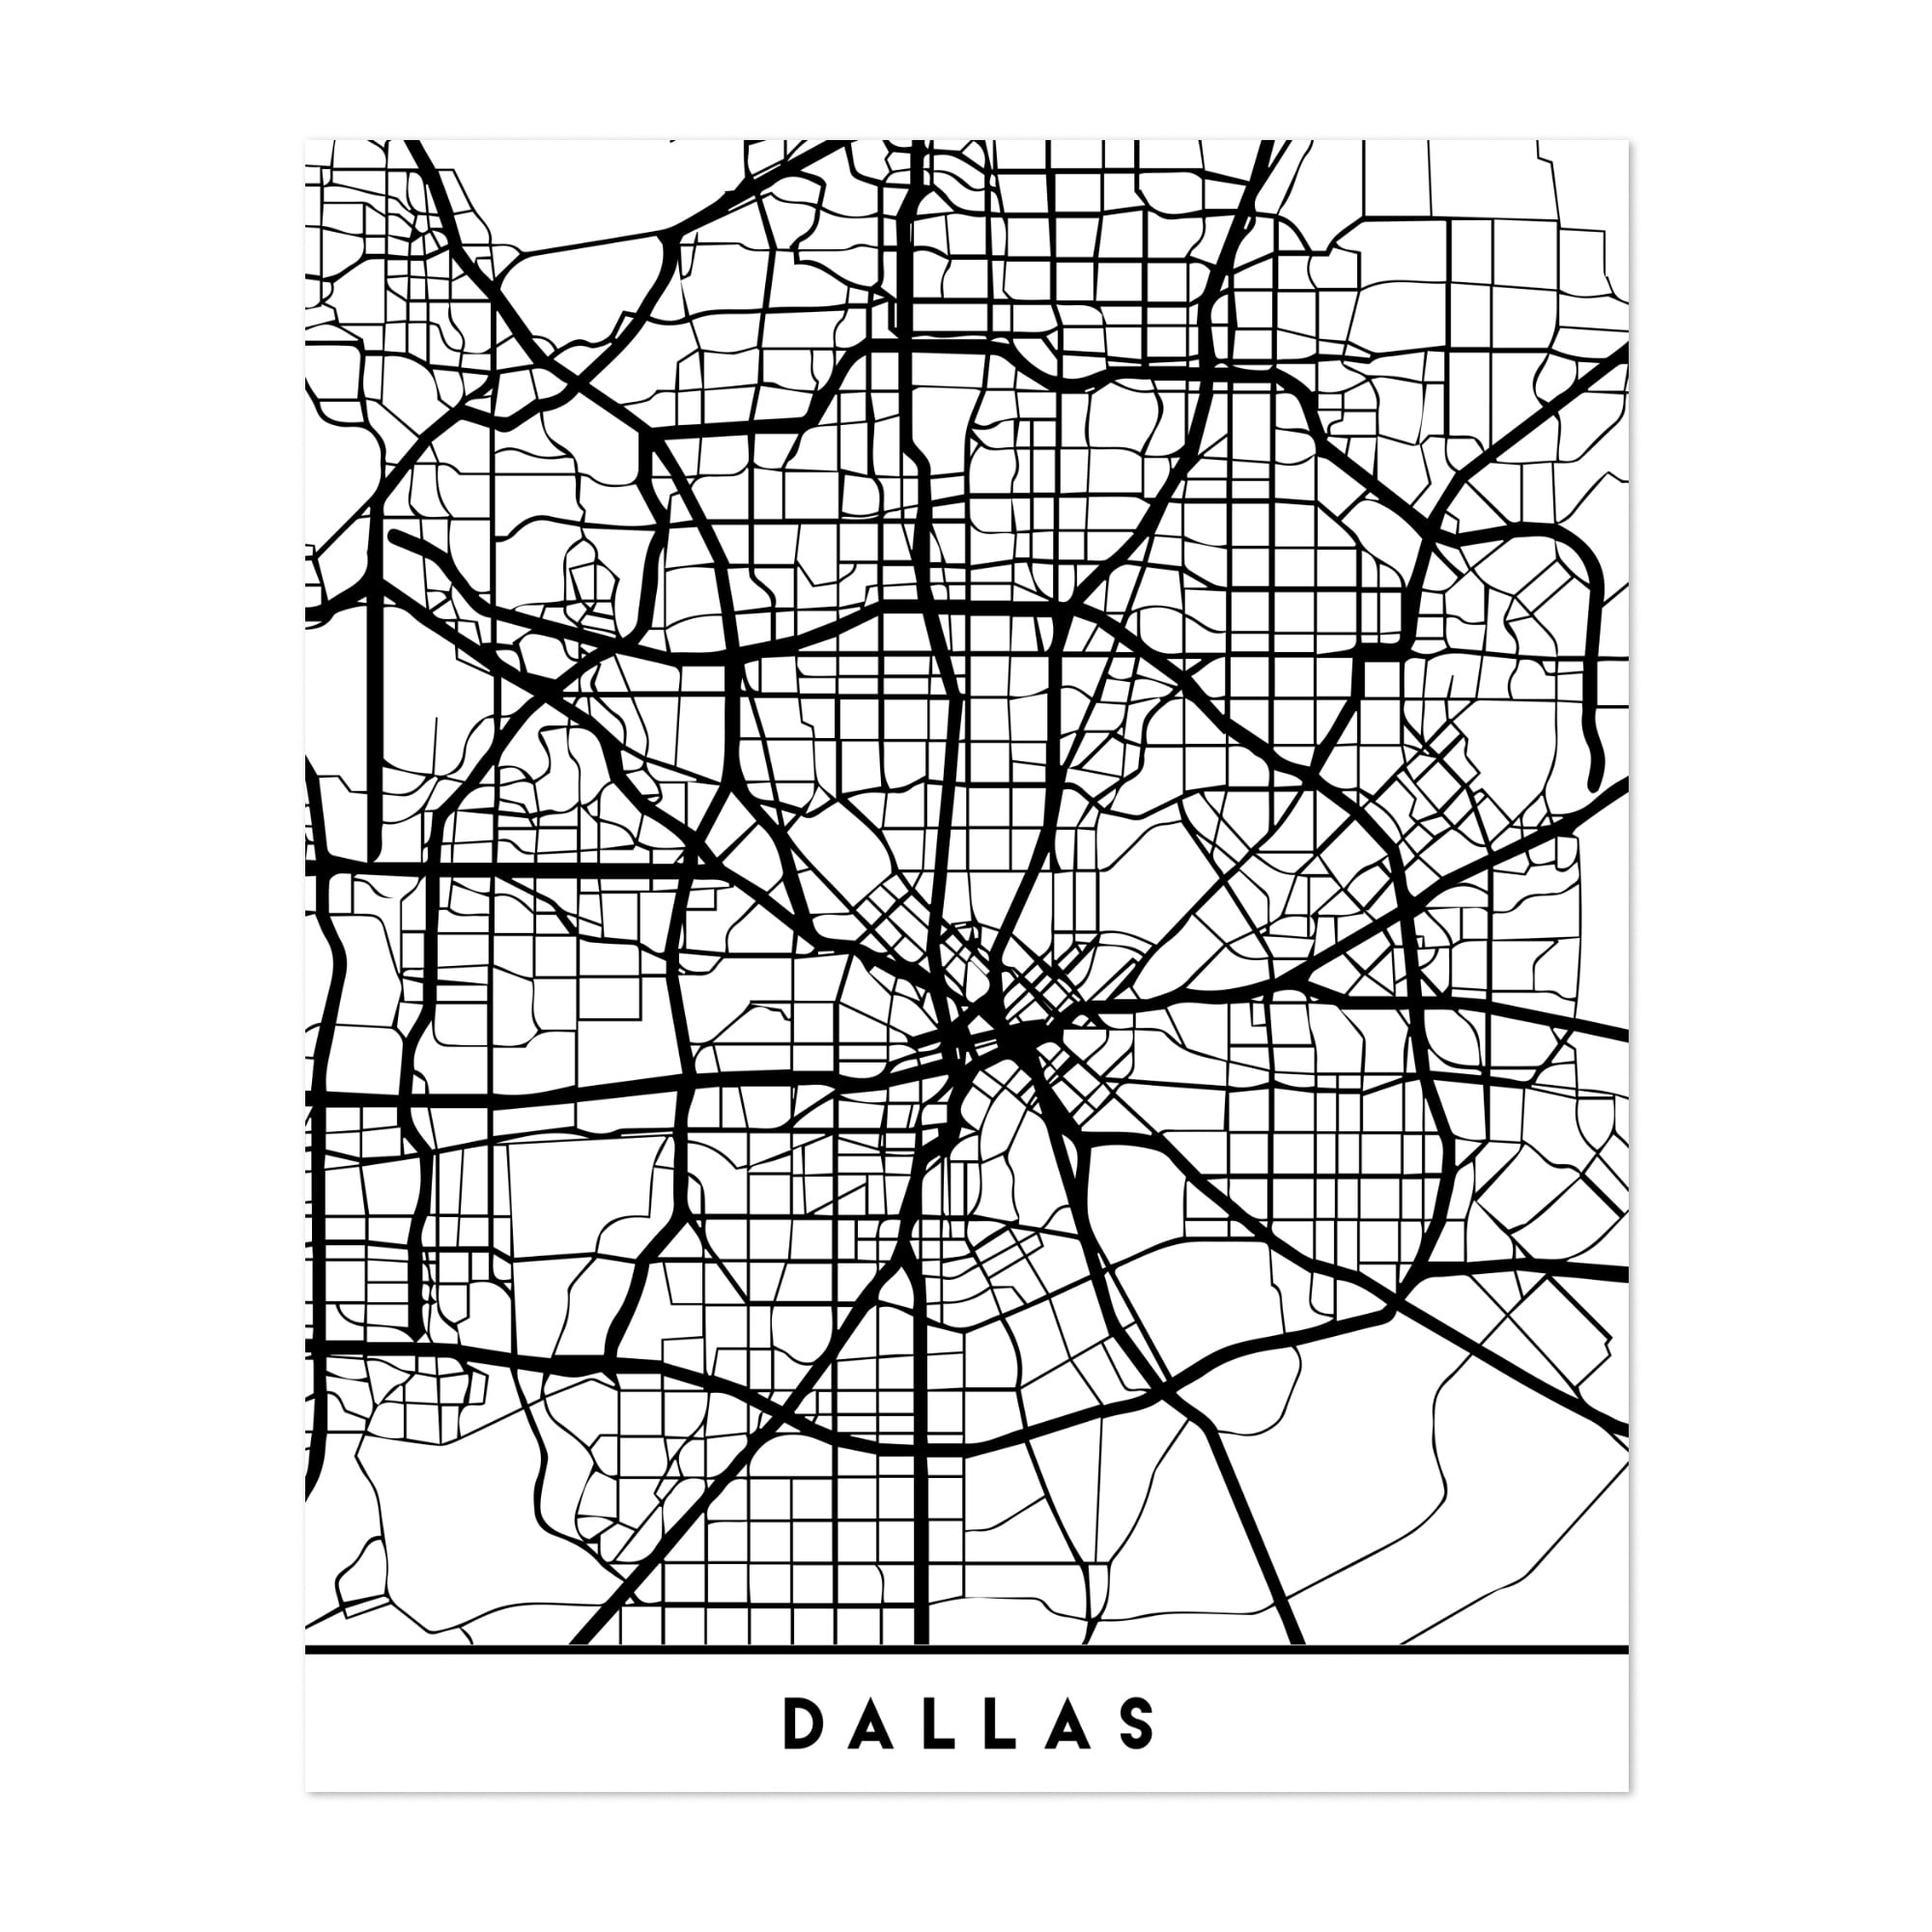 Classic Maps of American Cities Poster & Canvas Print Options Retro Dallas Texas Street Map